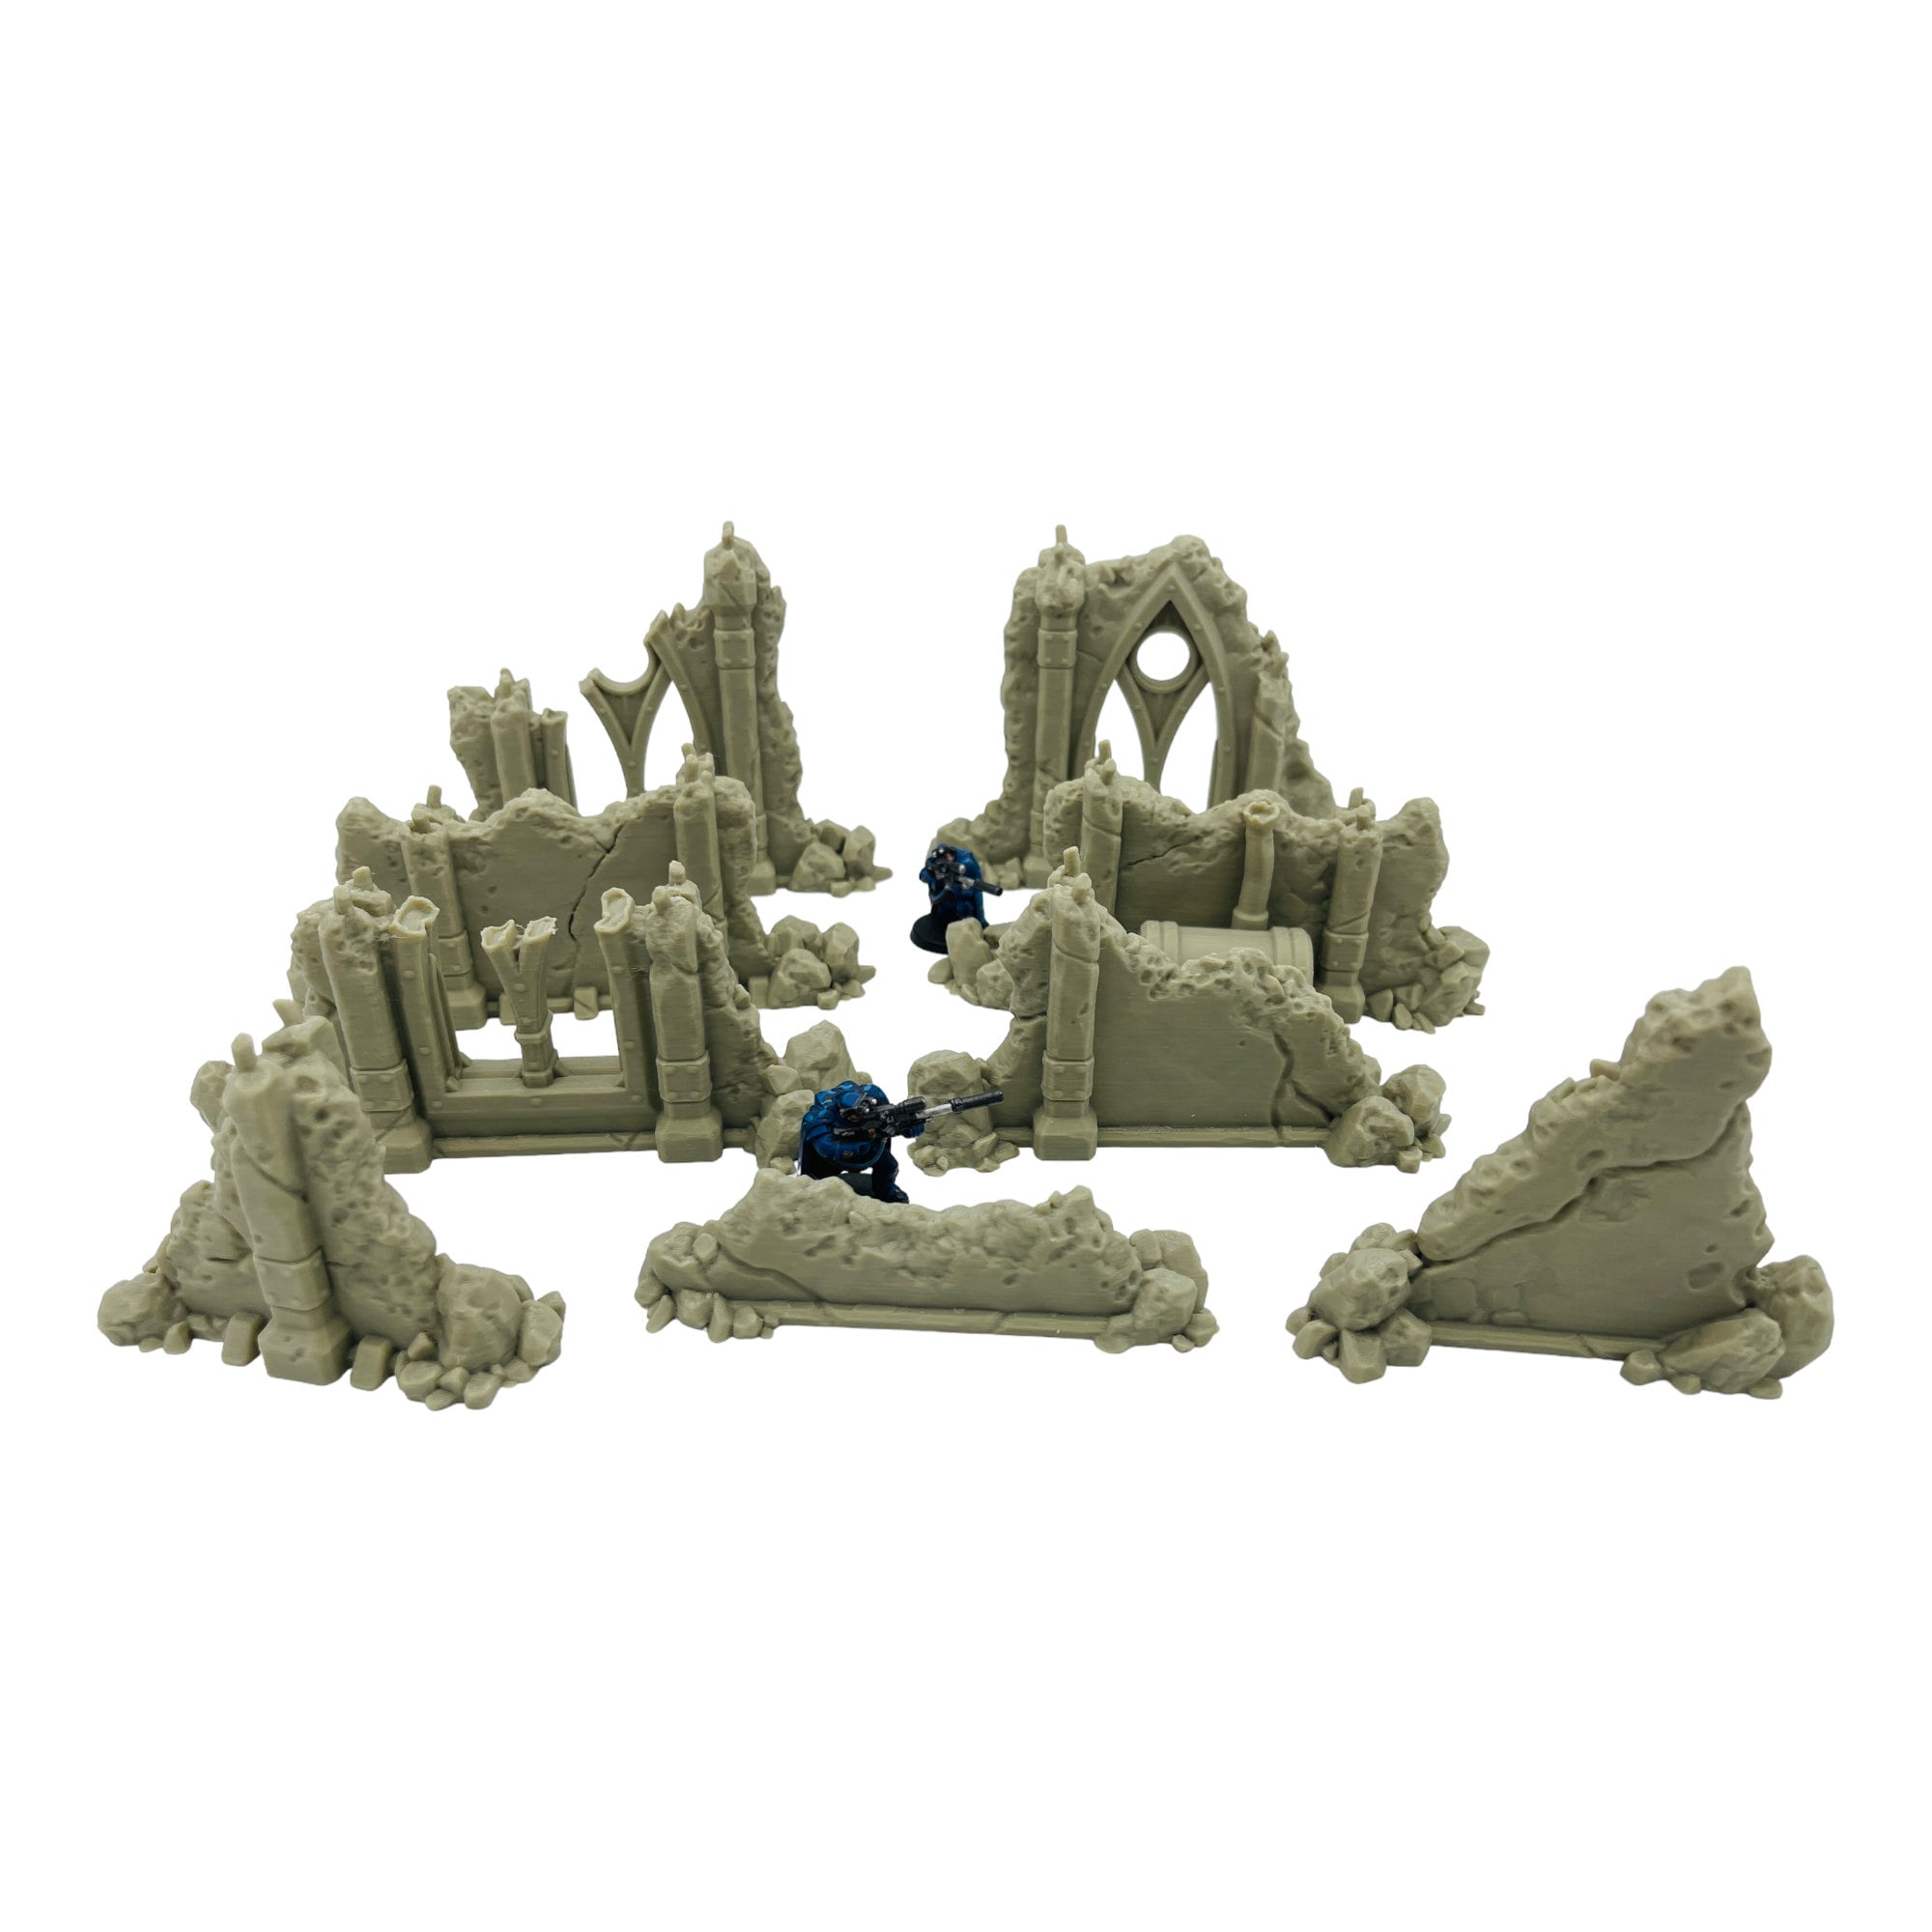 Ruined Ground Scatter Strait Pieces - Ruins of the Empire / Forbidden Prints / RPG and Wargame 3d Printed Terrain / Licensed Printer